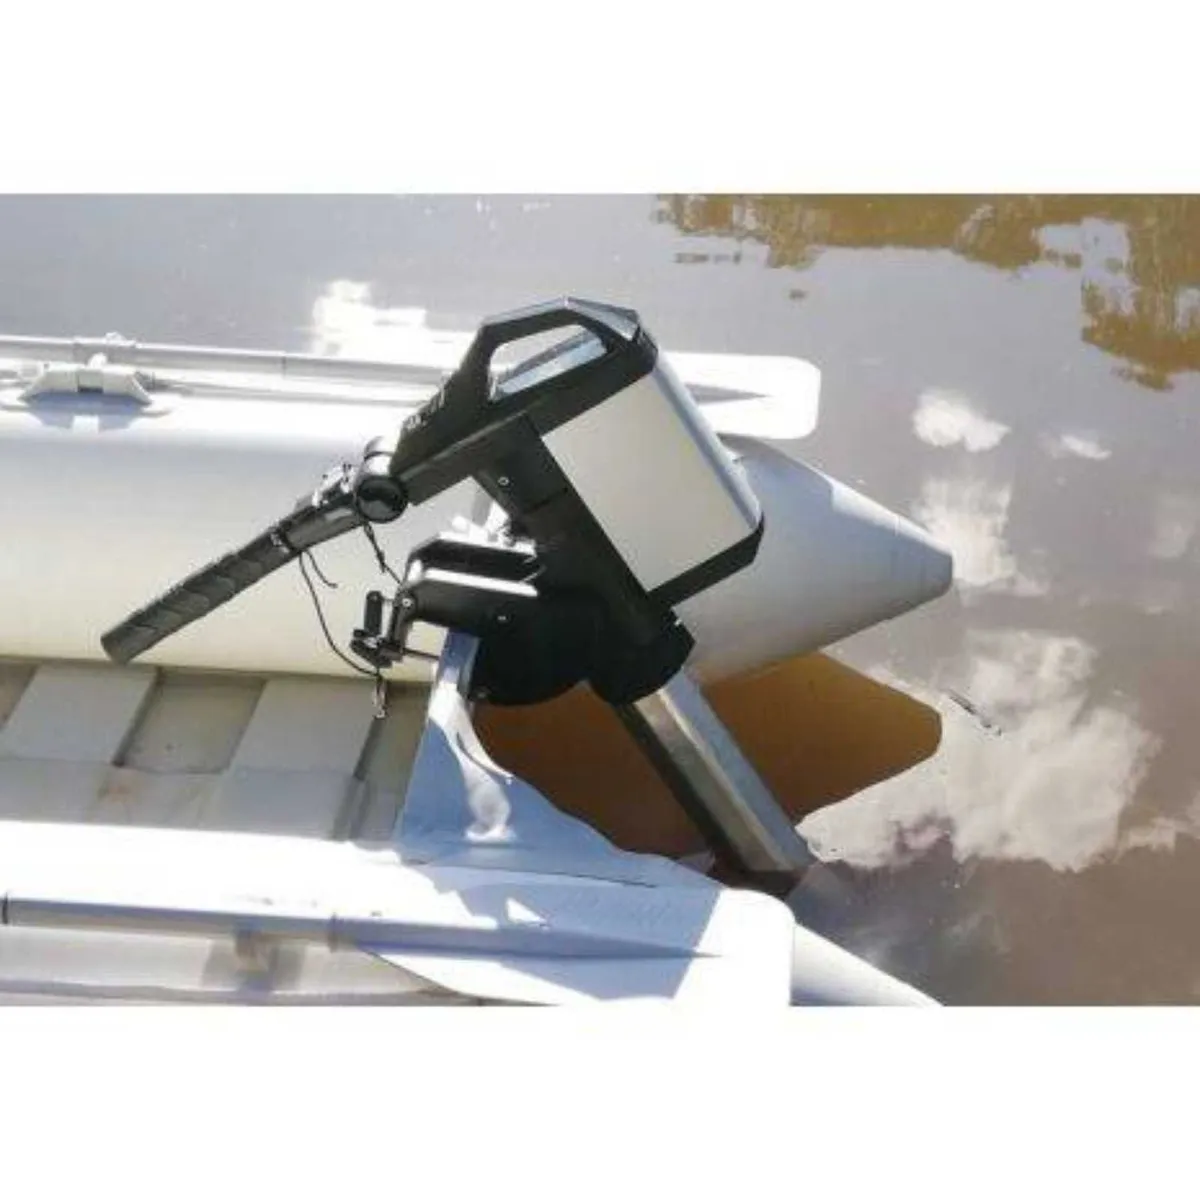 PULSAR 3.0 HP Electric Outboard 29.6v - Image 1